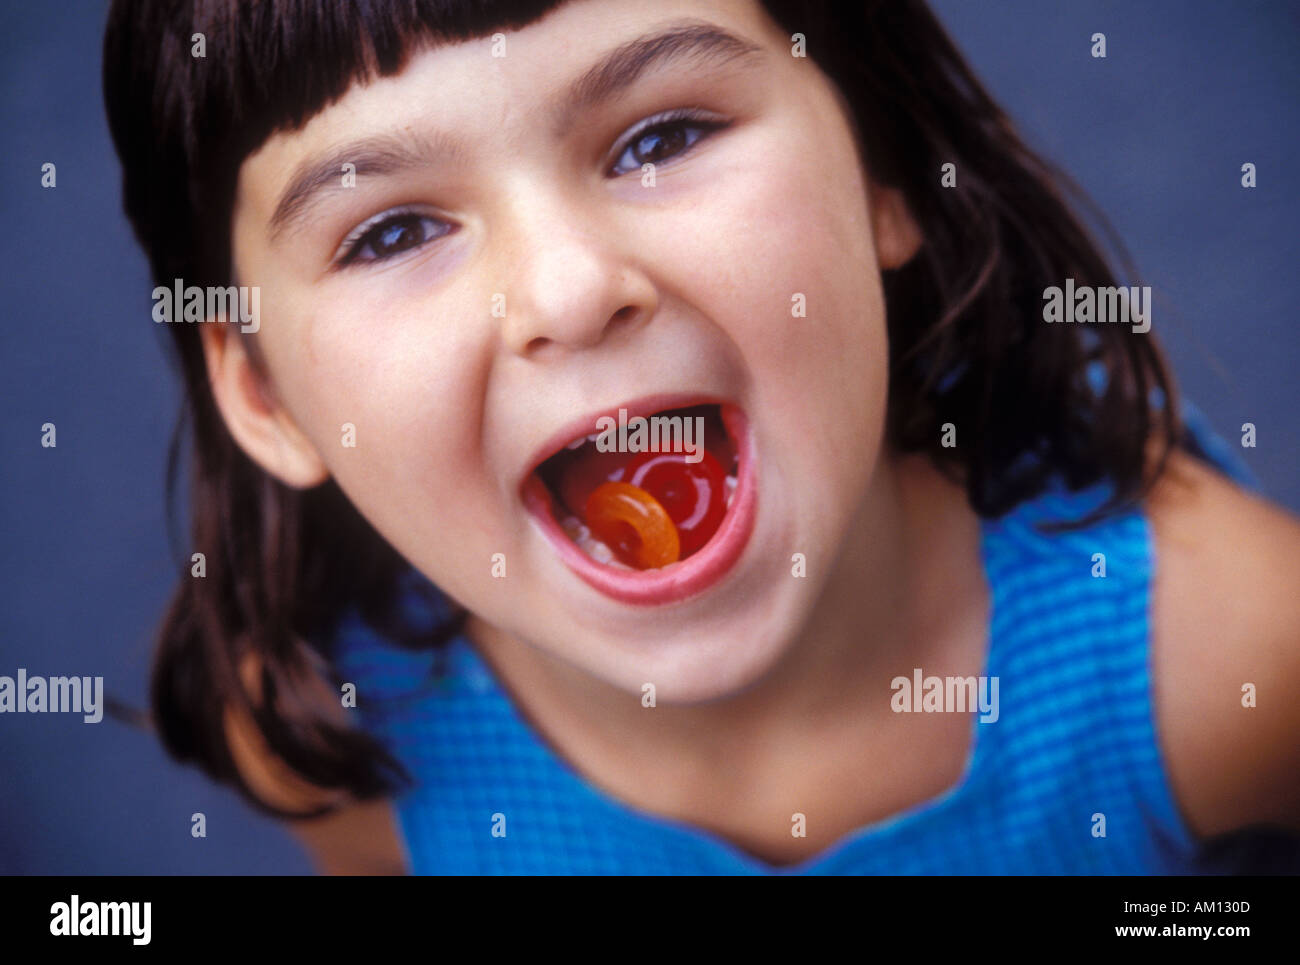 Girl With Candy in Mouth Stock Photo